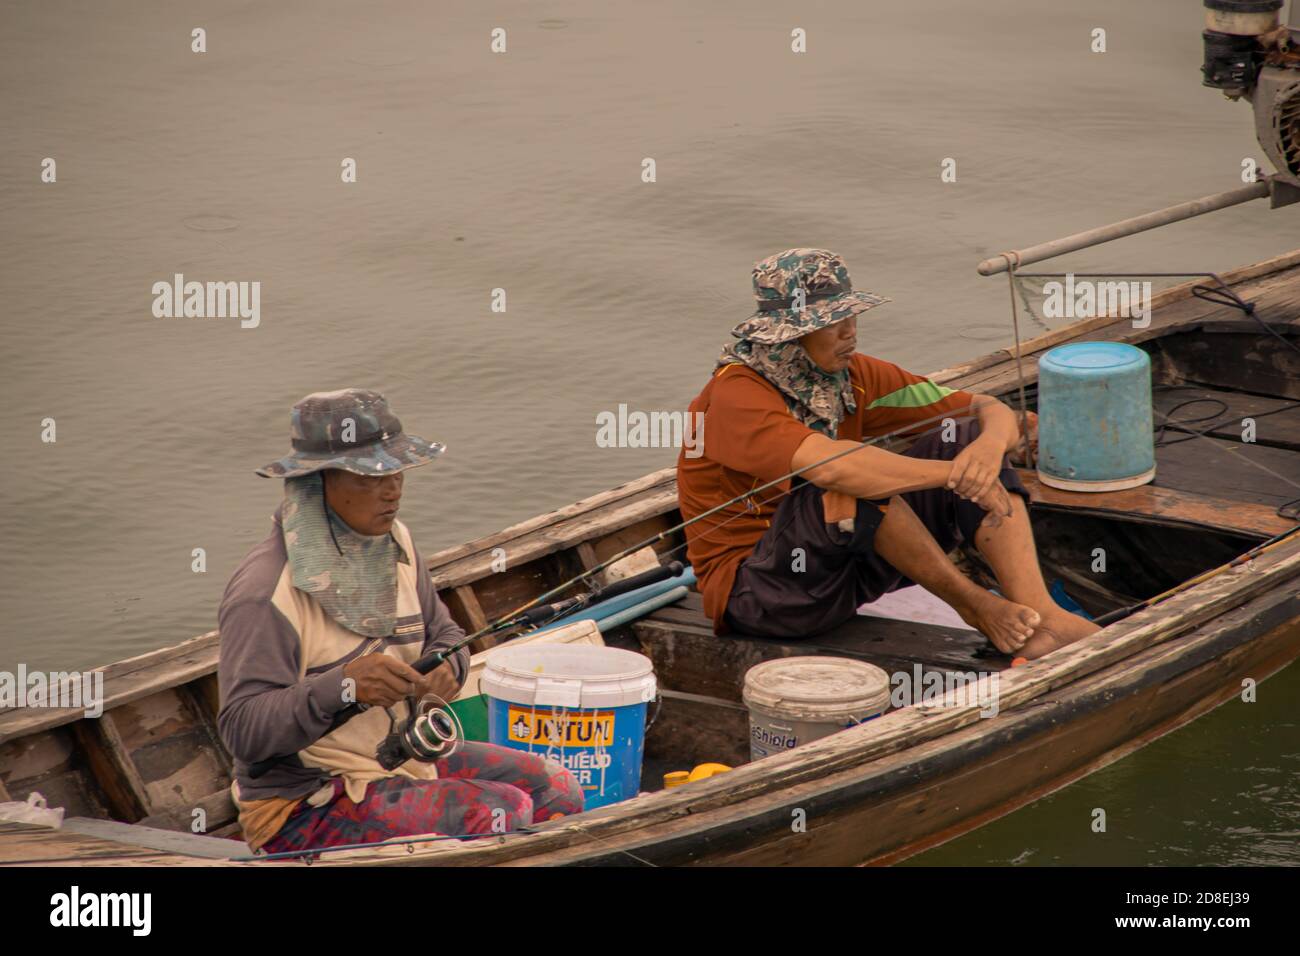 Two people fishing in a boat, Thailand, Koh Phangan, September 2019 Stock  Photo - Alamy